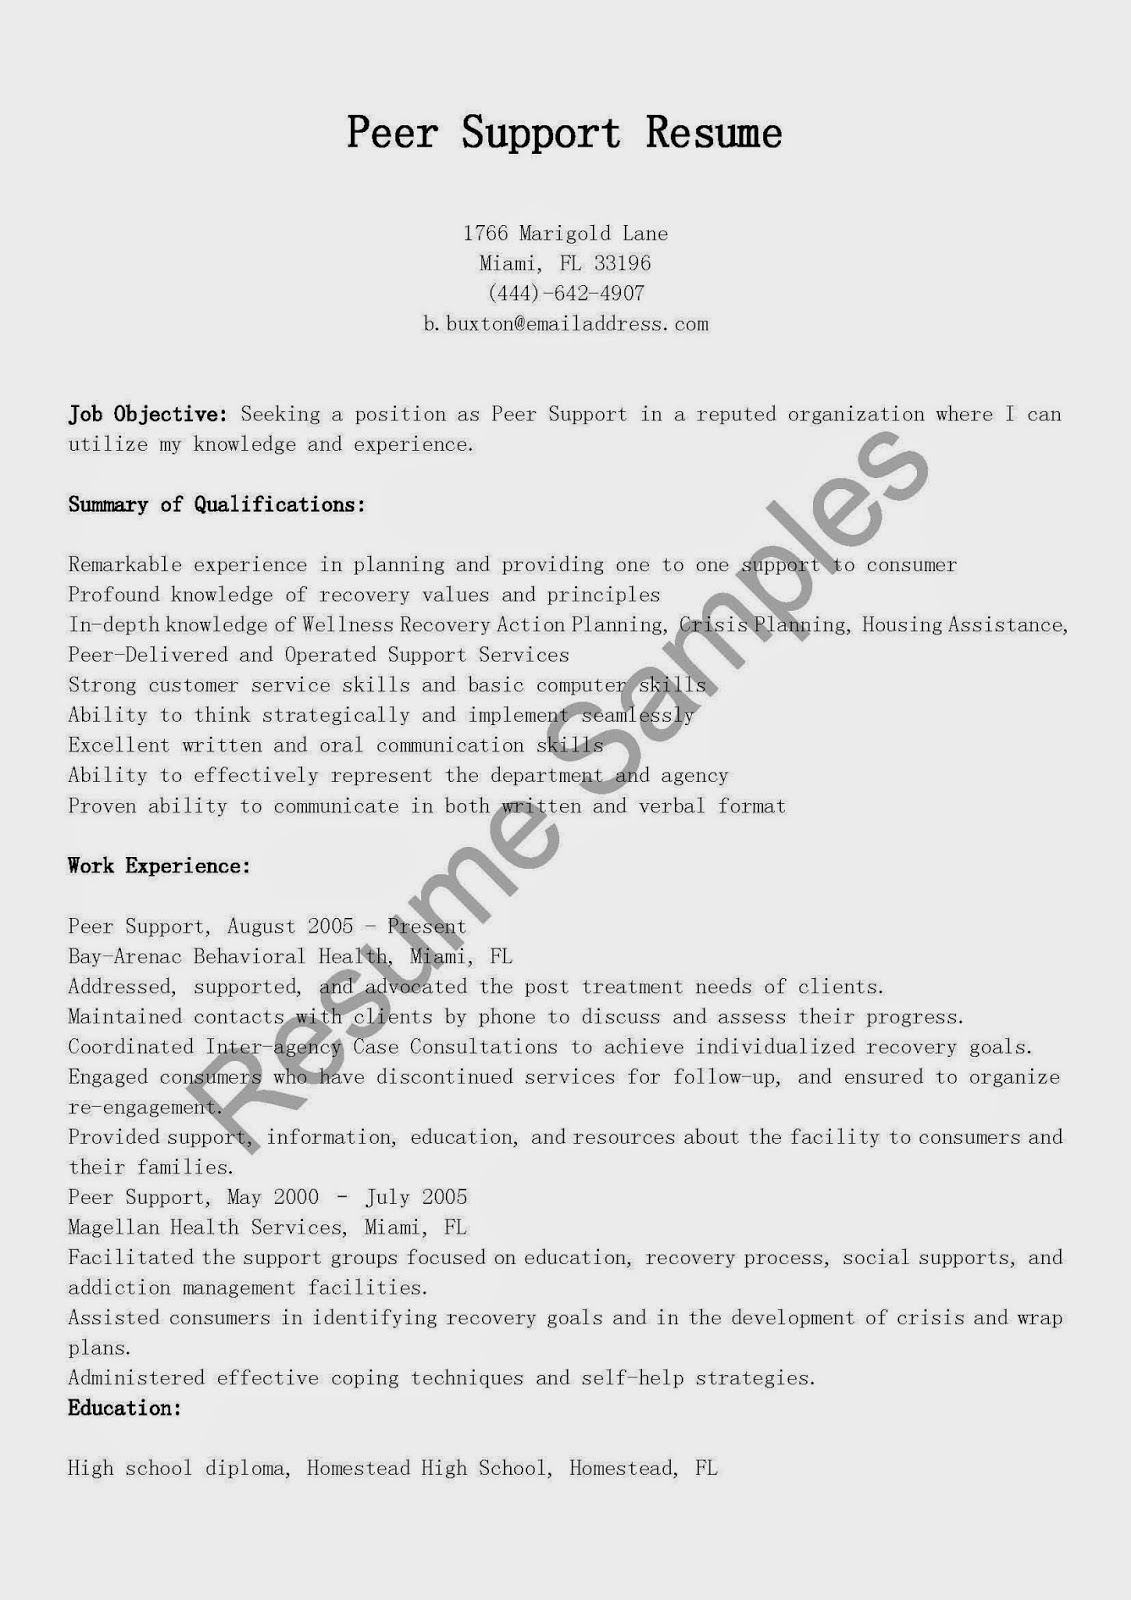 Where can i get free help with my resume